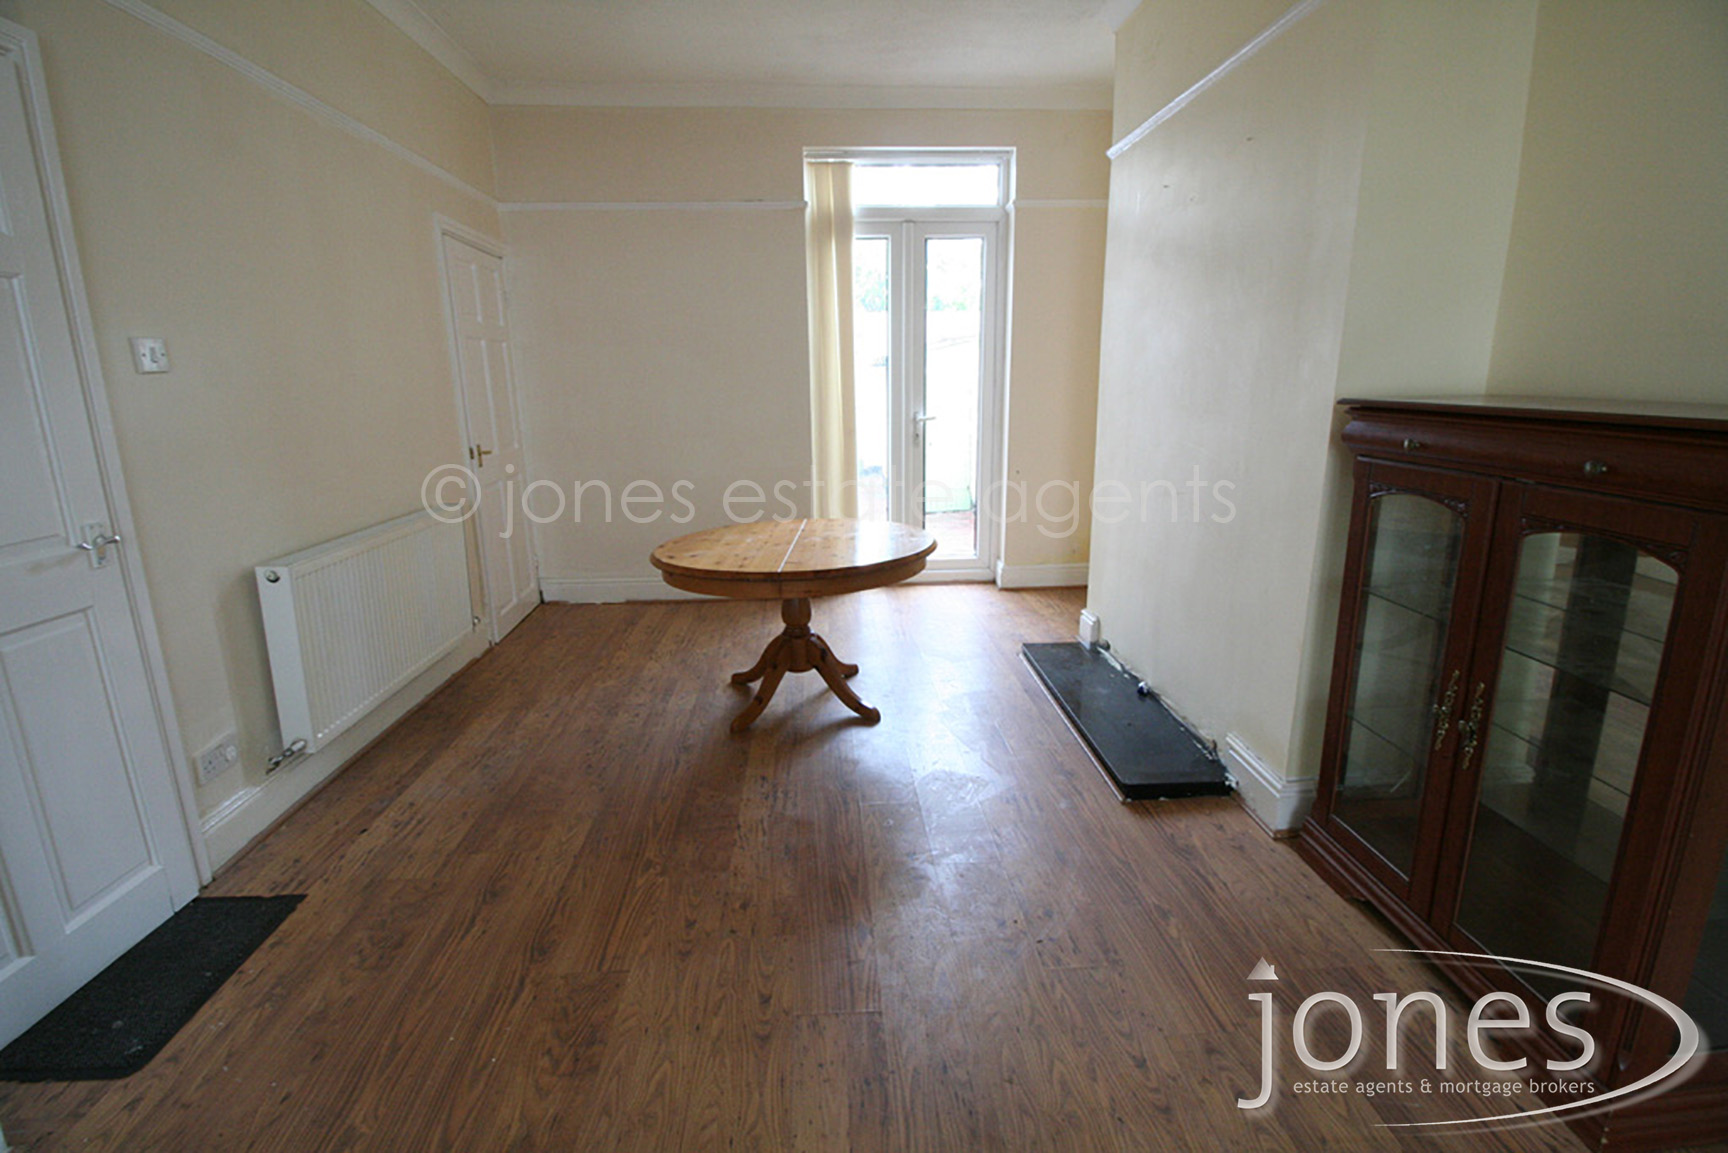 Home for Sale Let - Photo 03 St Cuthberts Road, Stockton on tees, TS18 3JW